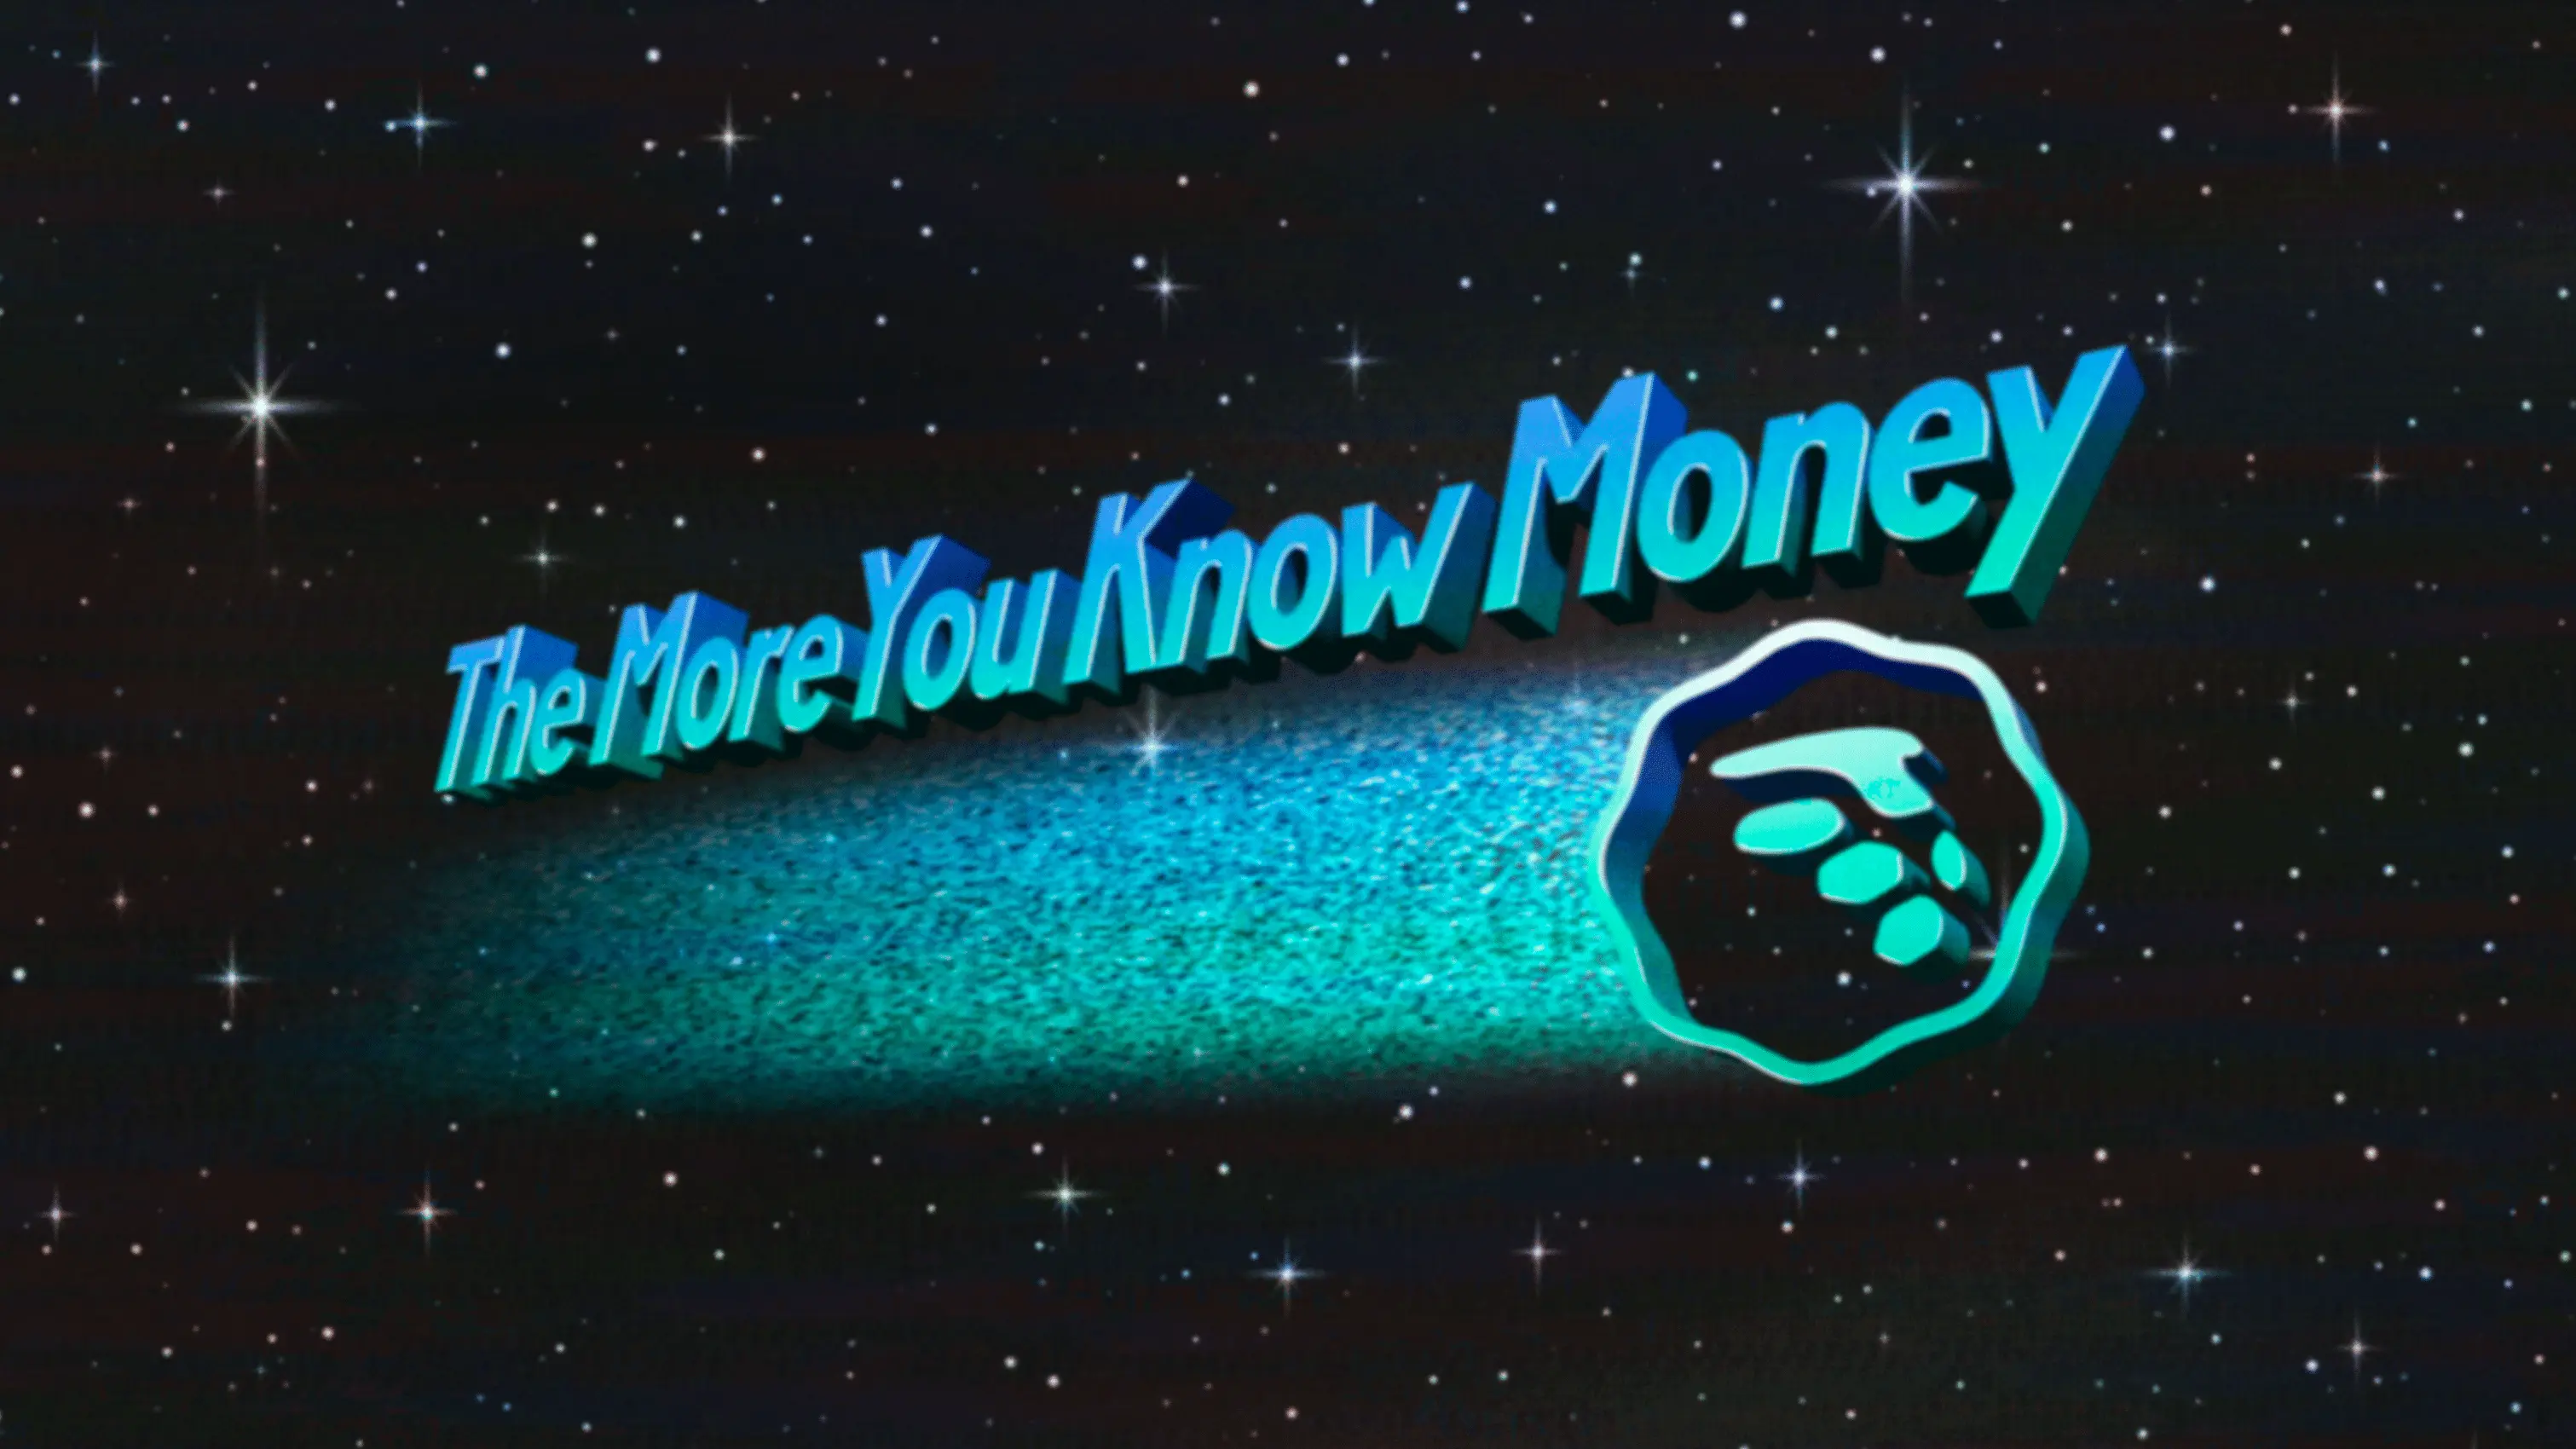 The more you know money